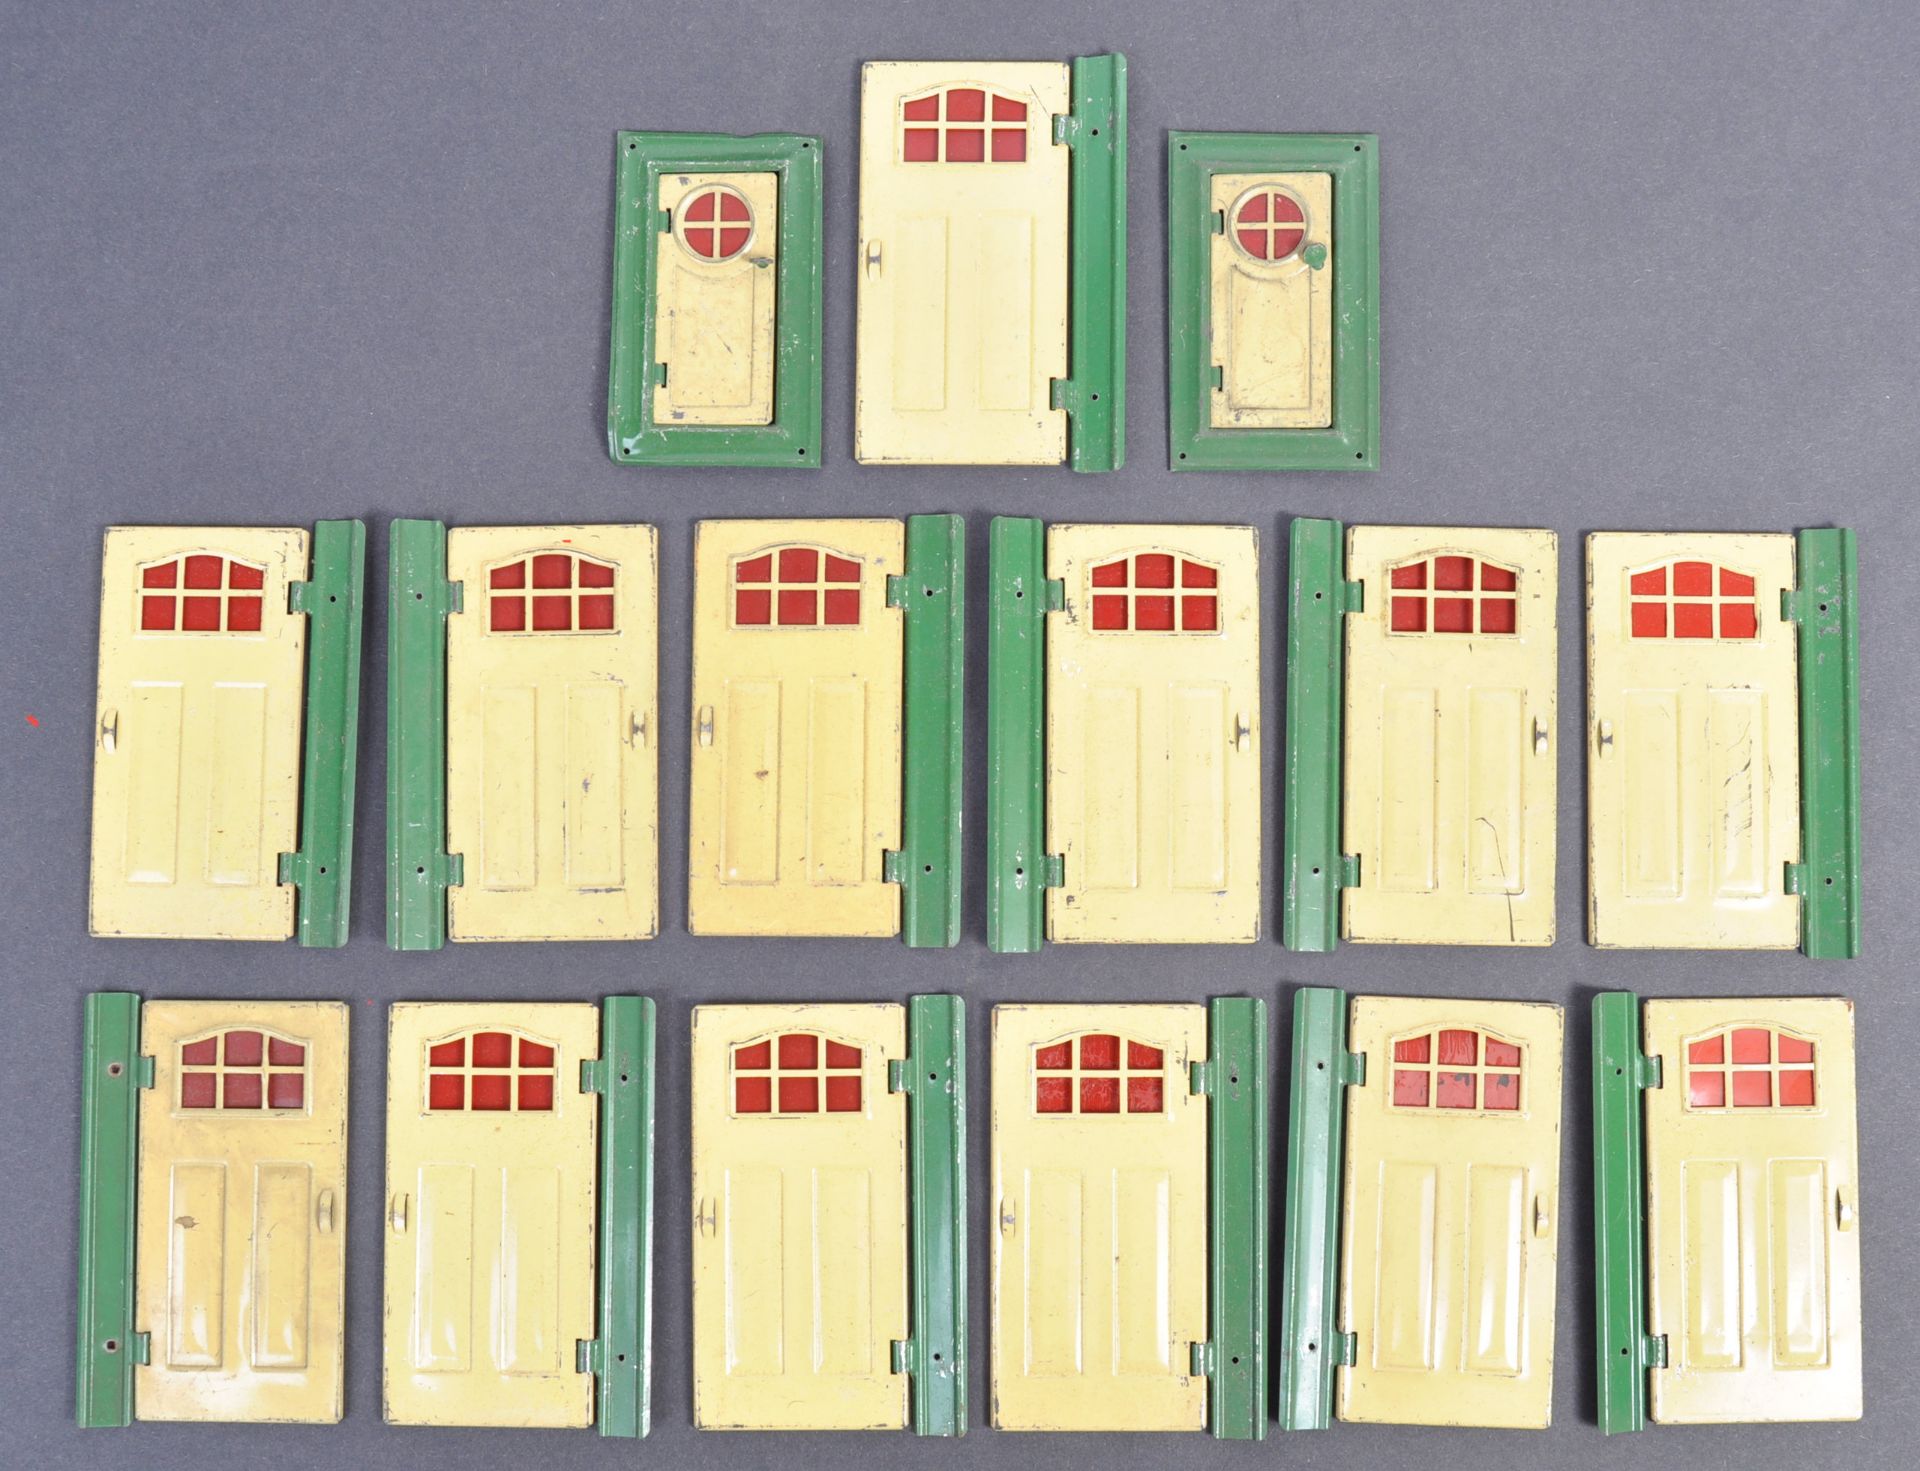 COLLECTION OF VINTAGE TRI-ANG DOLLS HOUSE DOORS / WINDOWS